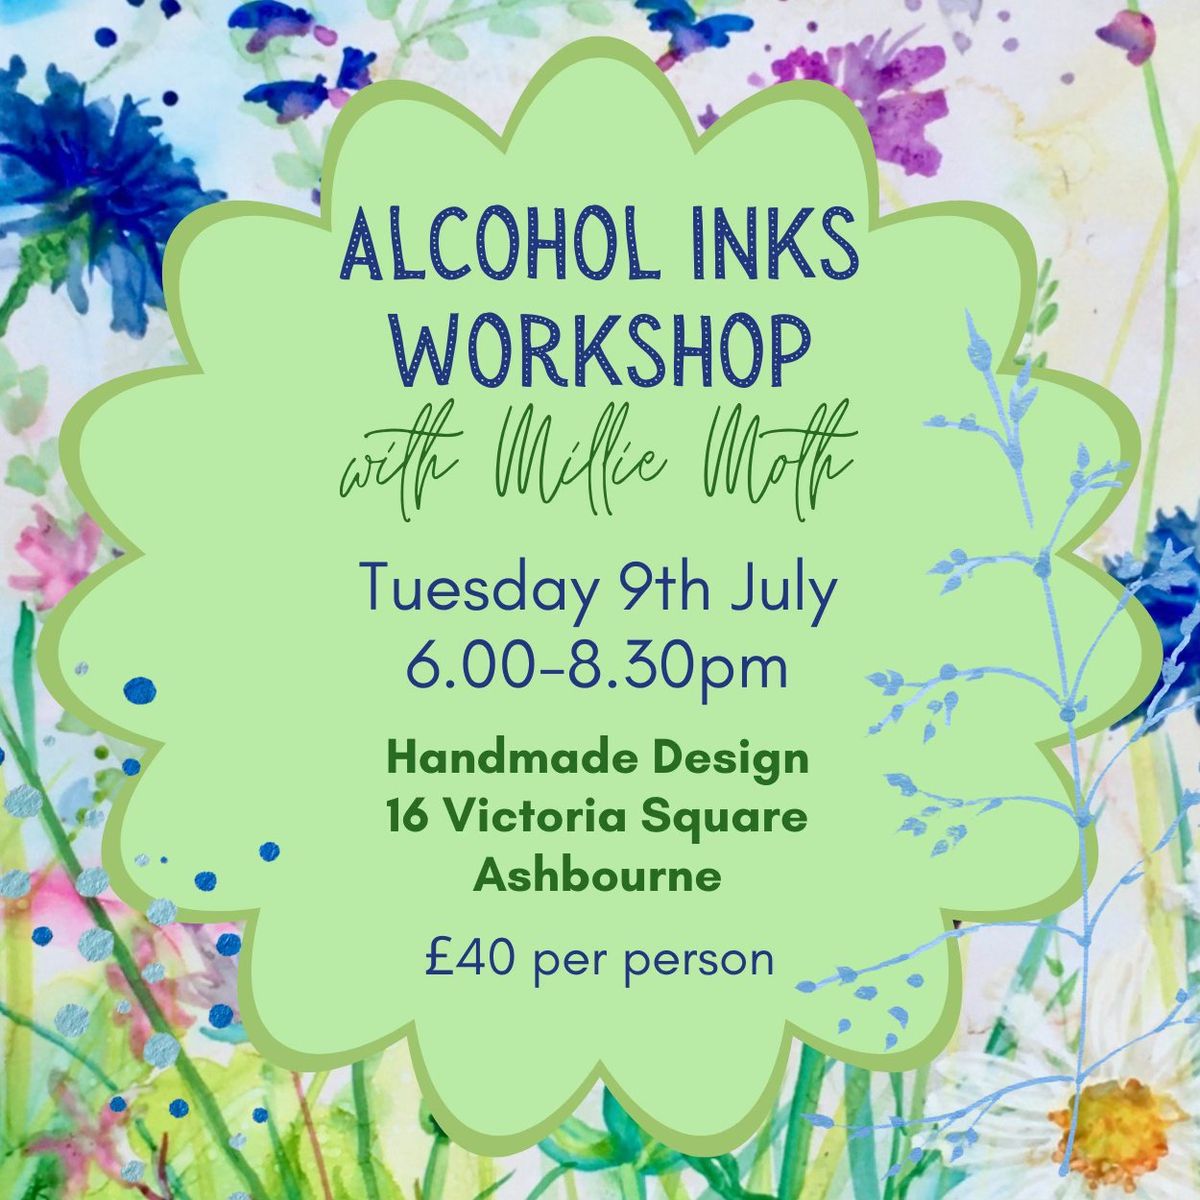 Alcohol inks workshop hosted by Millie Moth